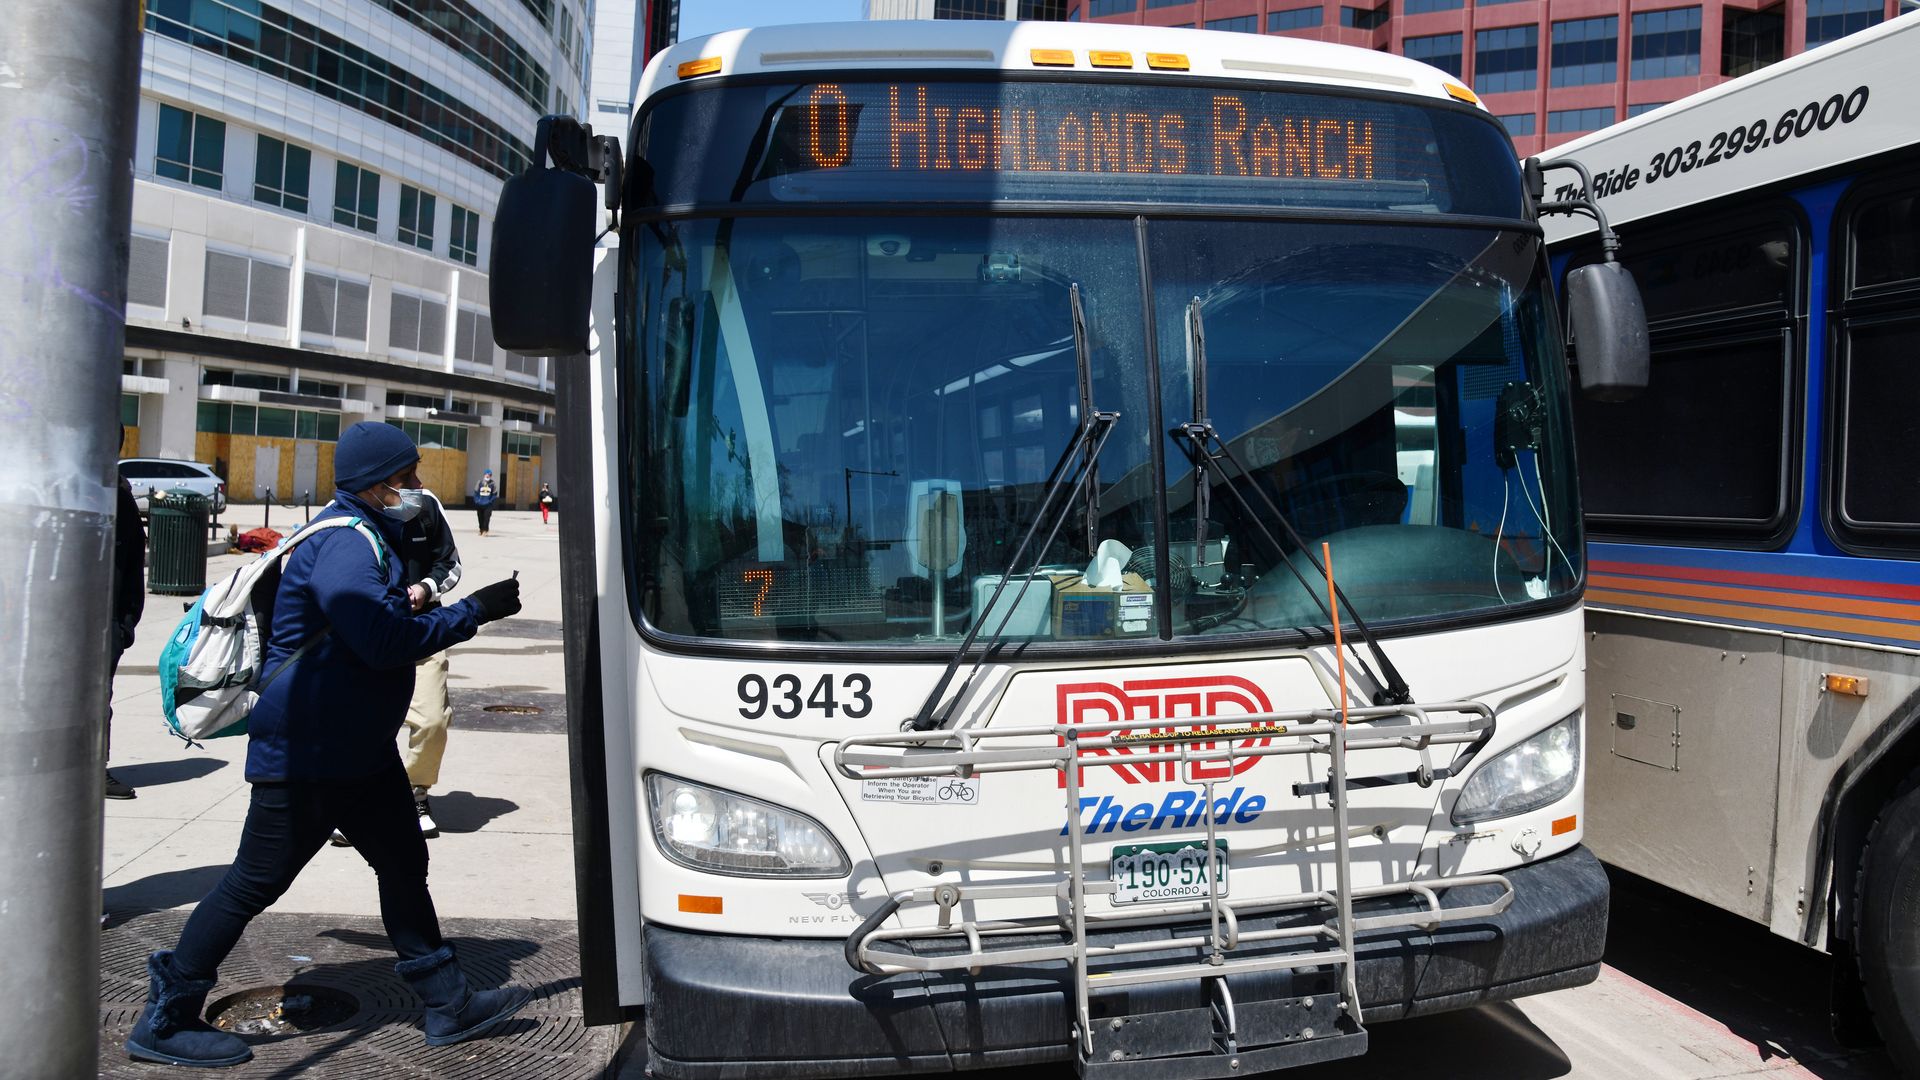 Passengers get onboard an RTD bus in Denver. Photo: Hyoung Chang/Denver Post via Getty Images